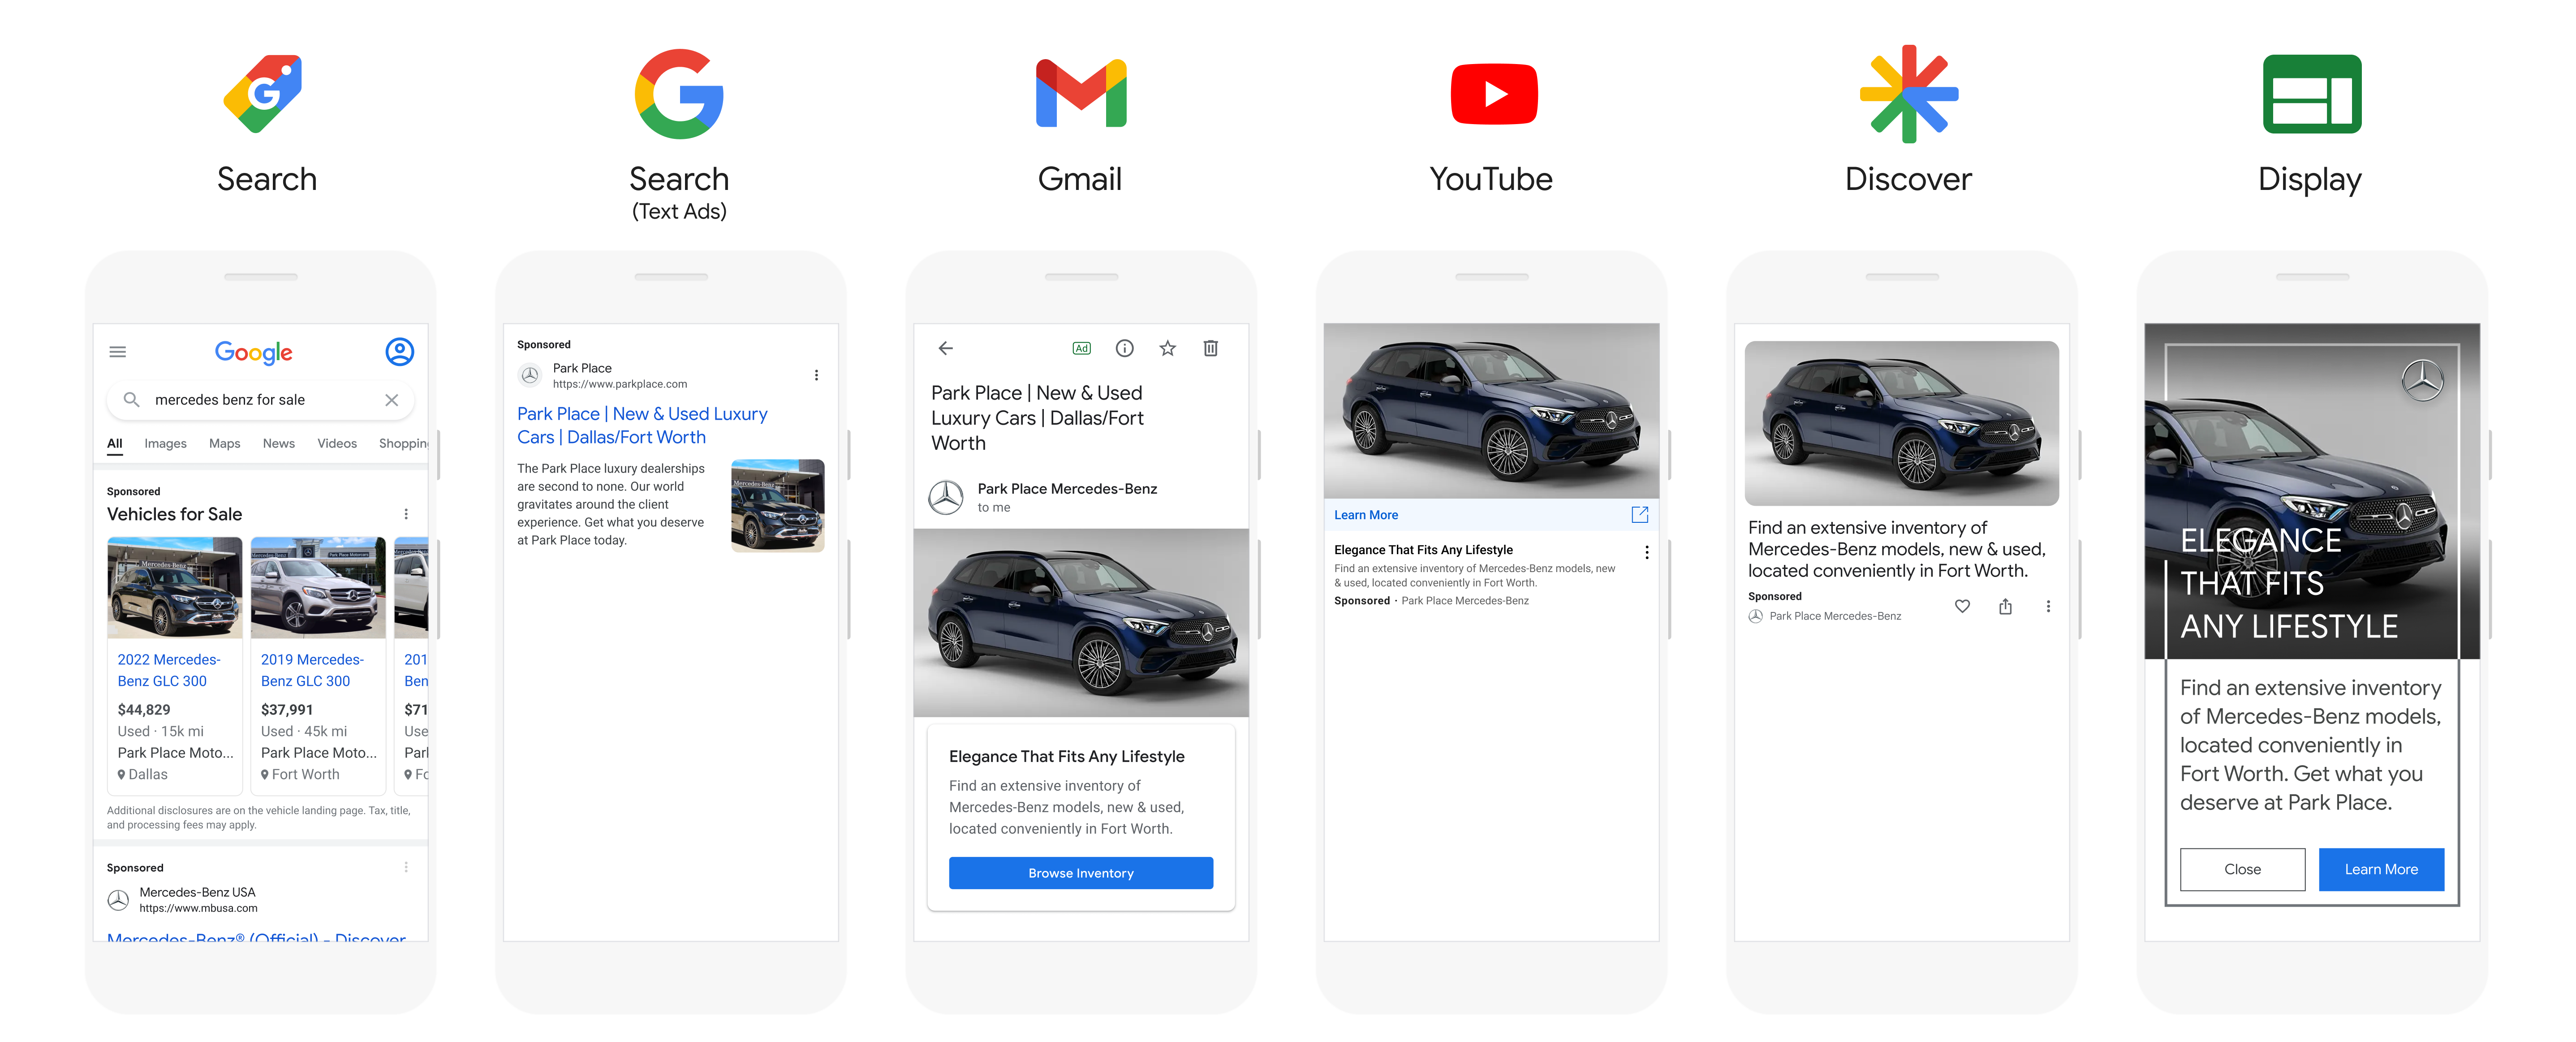 Examples of vehicle ads across Search, Search (Text Ads), Gmail, YouTUbe, Discover, and Display